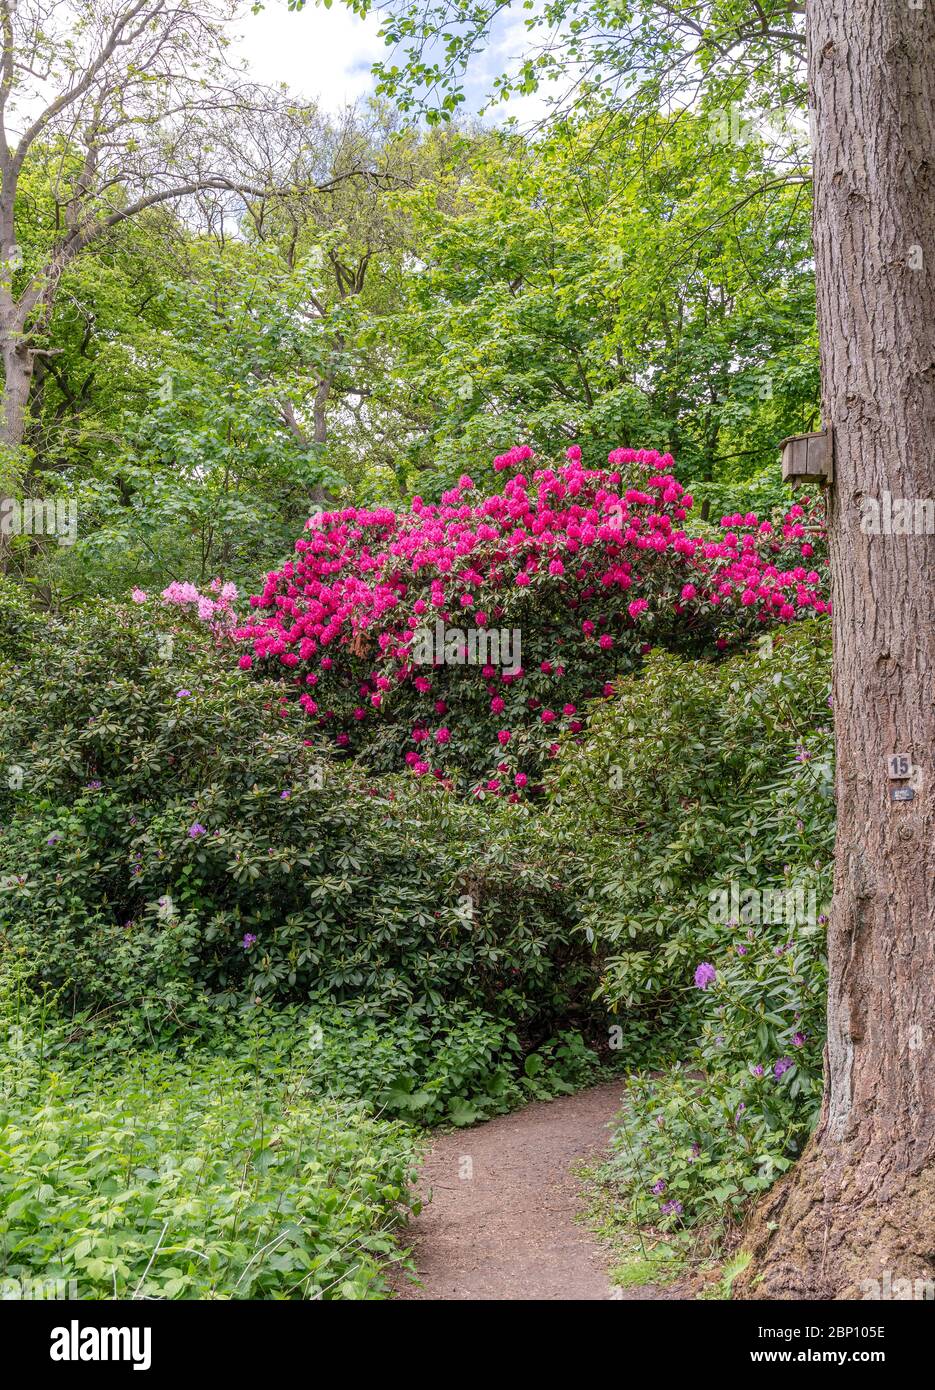 Rhododendron shrub in a woodland setting.  Blooming magenta flowers lie hight up amongst shrubs and trees. A footpath is in the foreground. Stock Photo